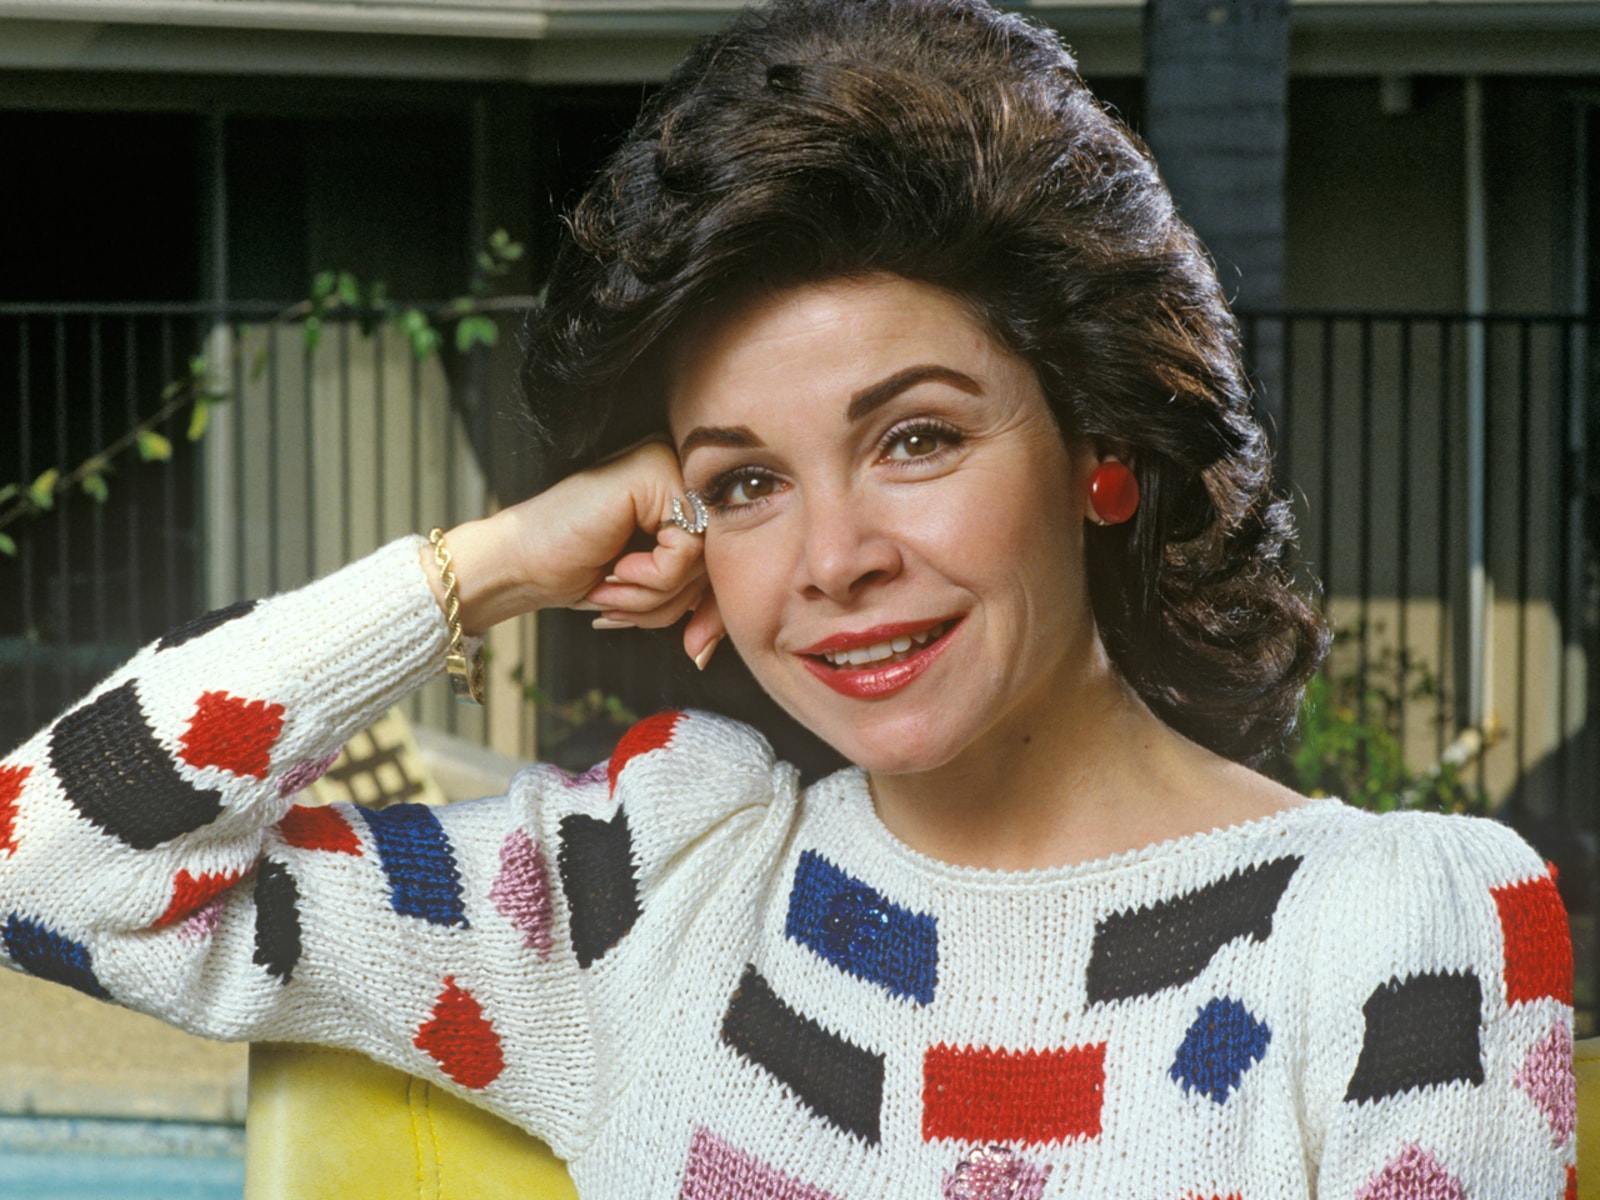 How long did Annette Funicello suffer from multiple sclerosis?